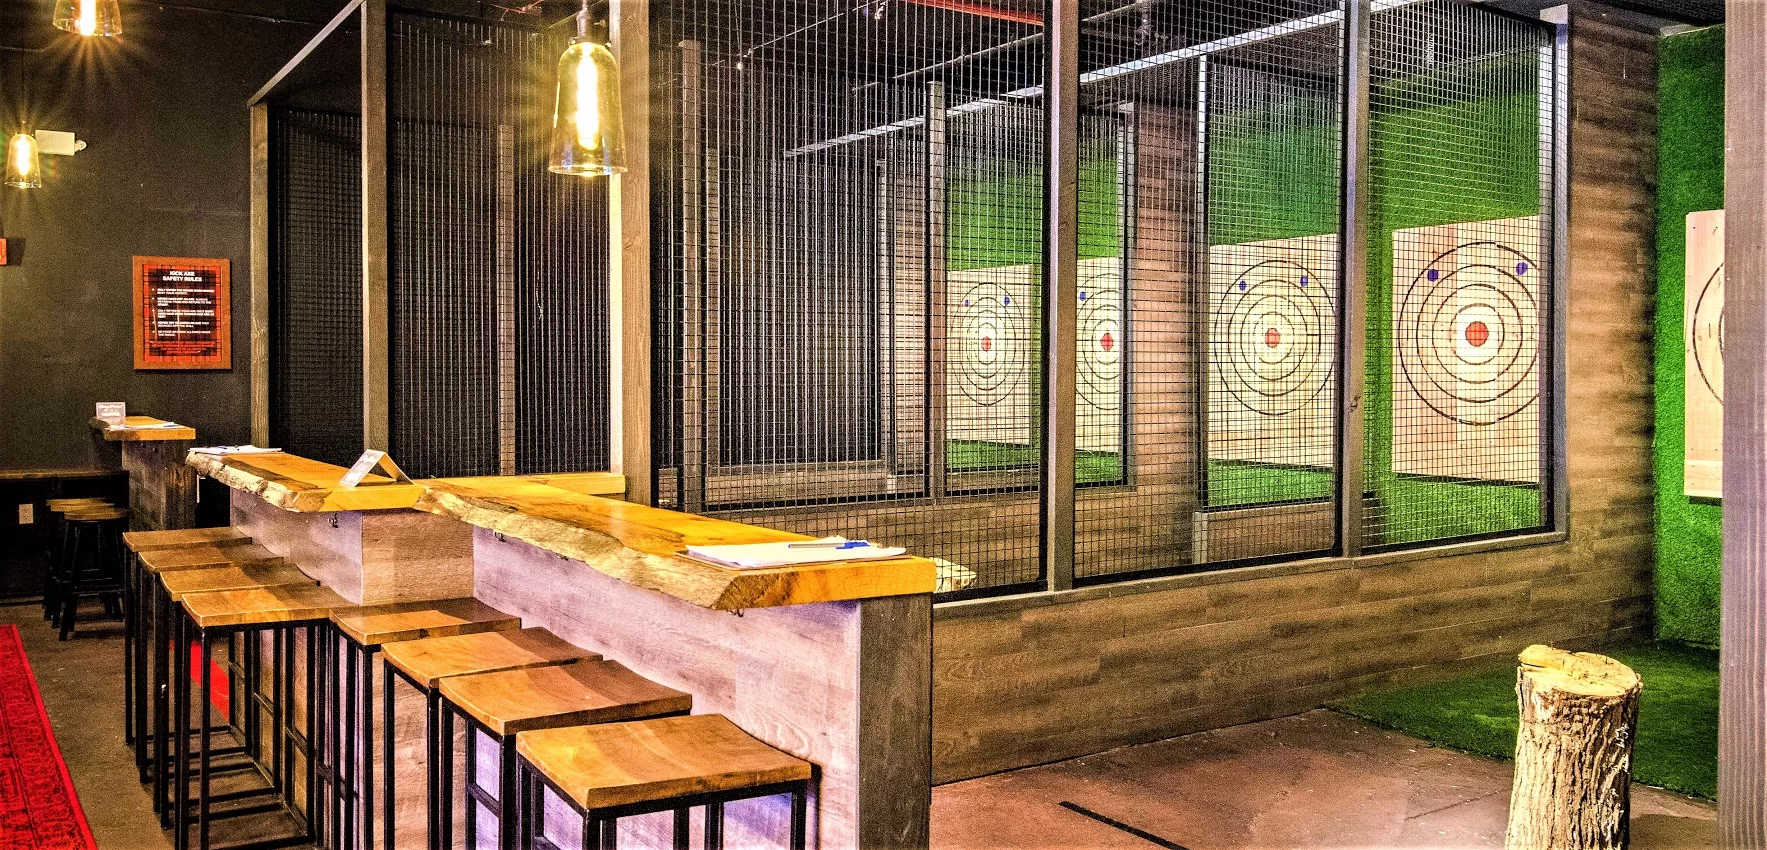 Indoor axe throwing lanes with target boards and bar stools.